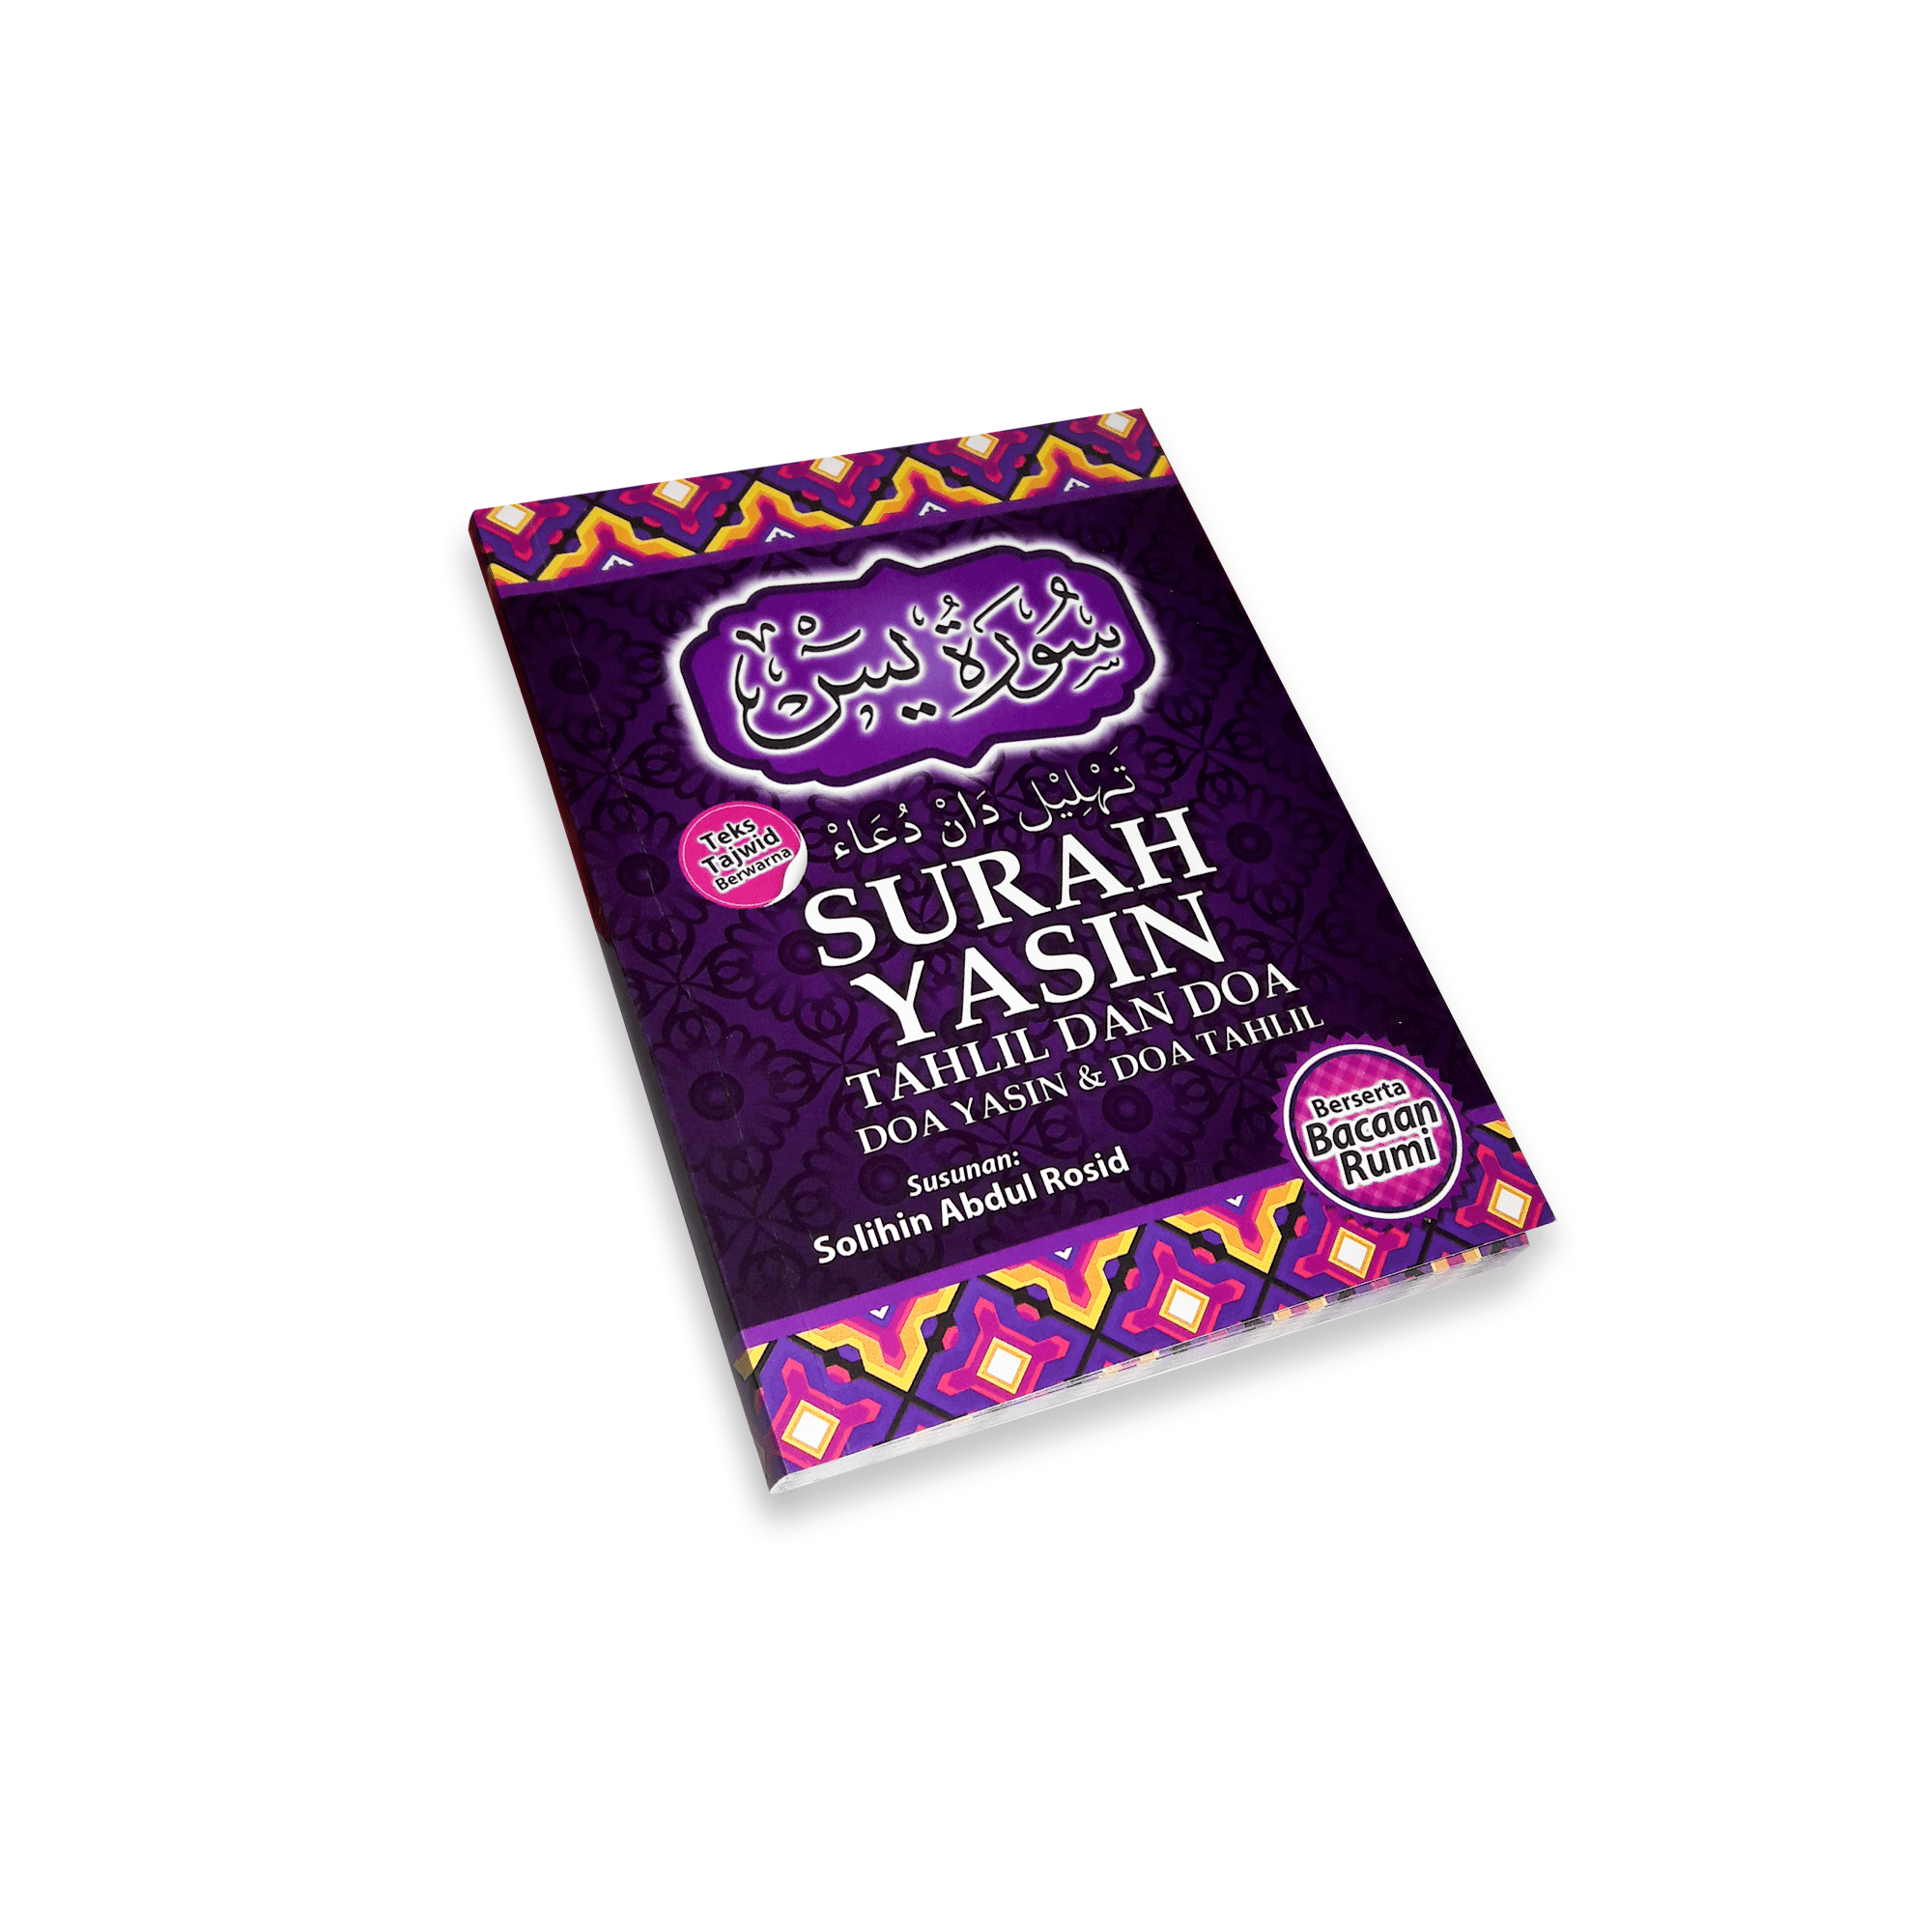 Surah Yasin Book (Malay Version With Romanised Text) - Small